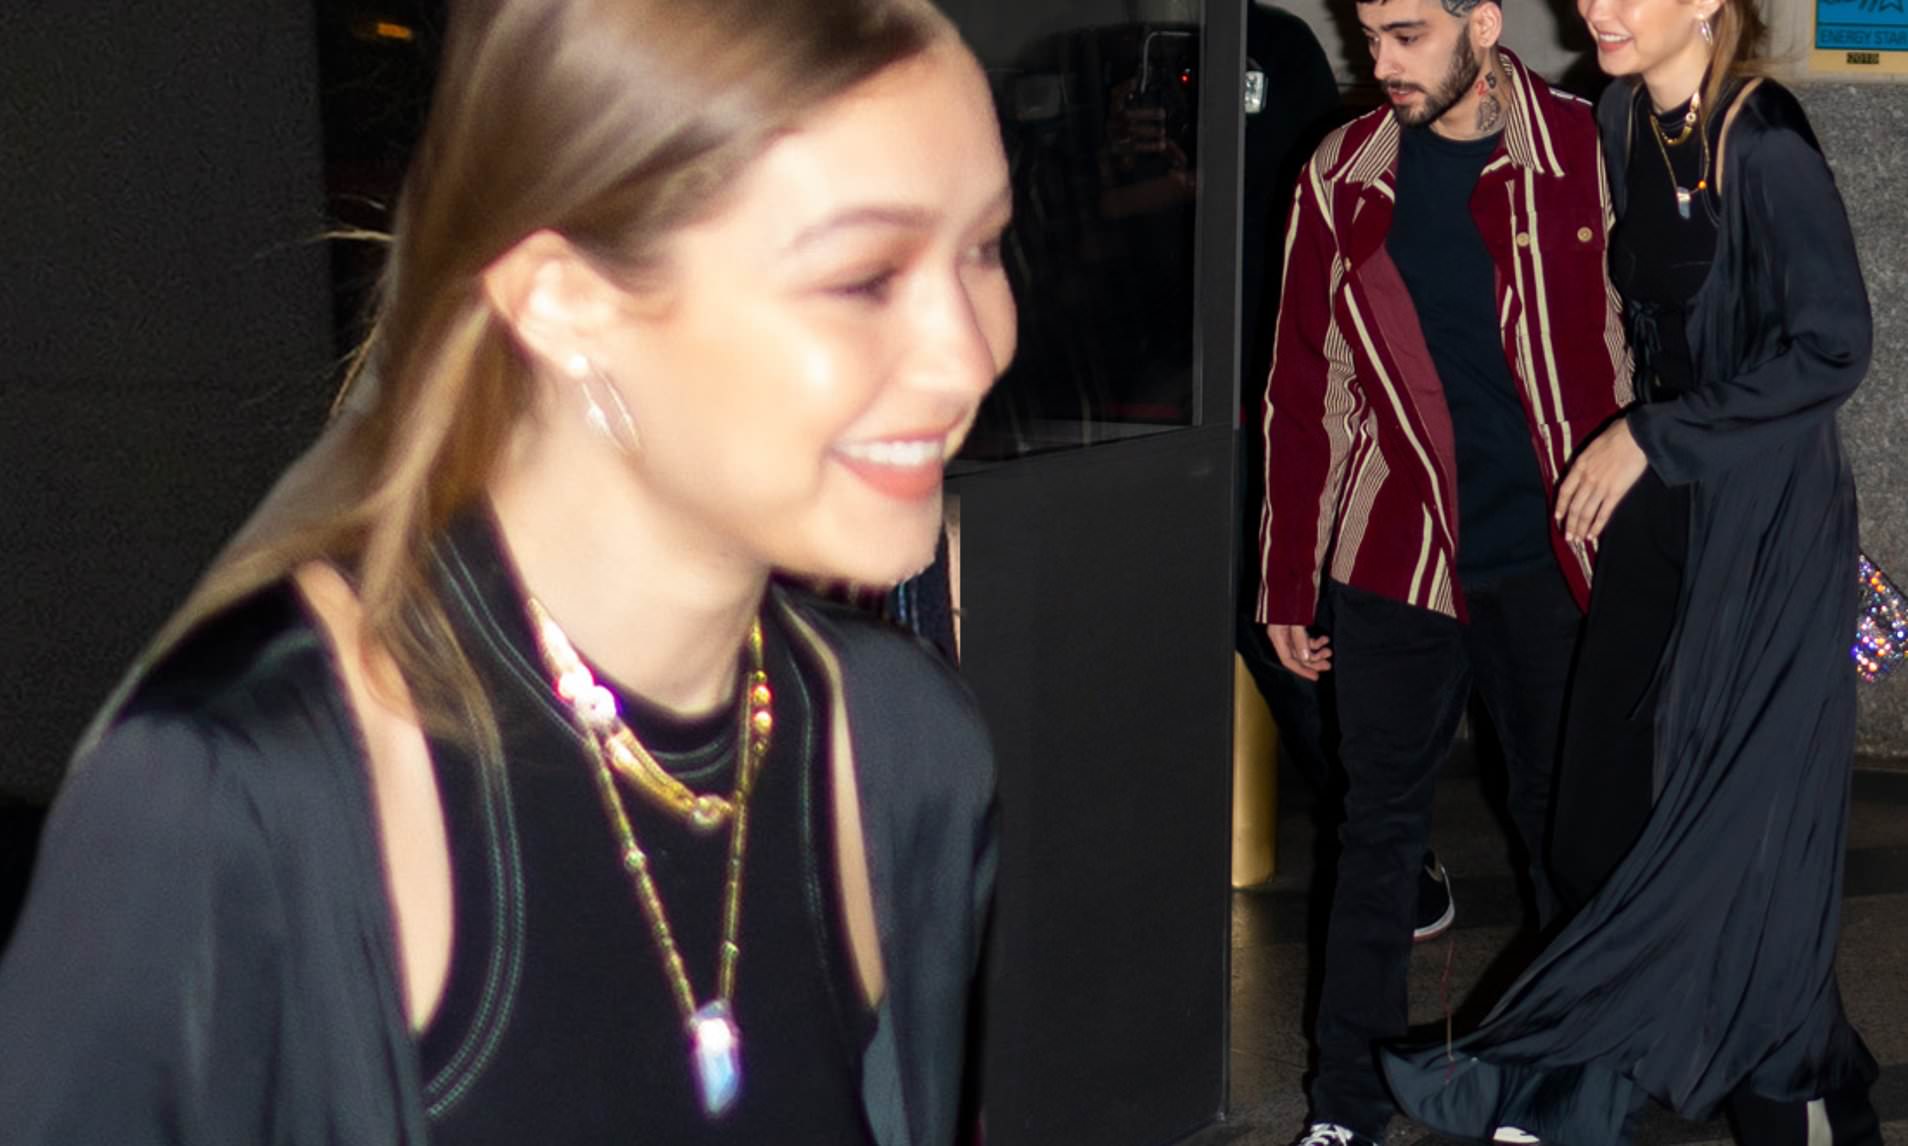 Gigi Hadid couldn’t look happier as she walks arm in arm with Zayn Malik after reuniting with on/off boyfriend on his birthday